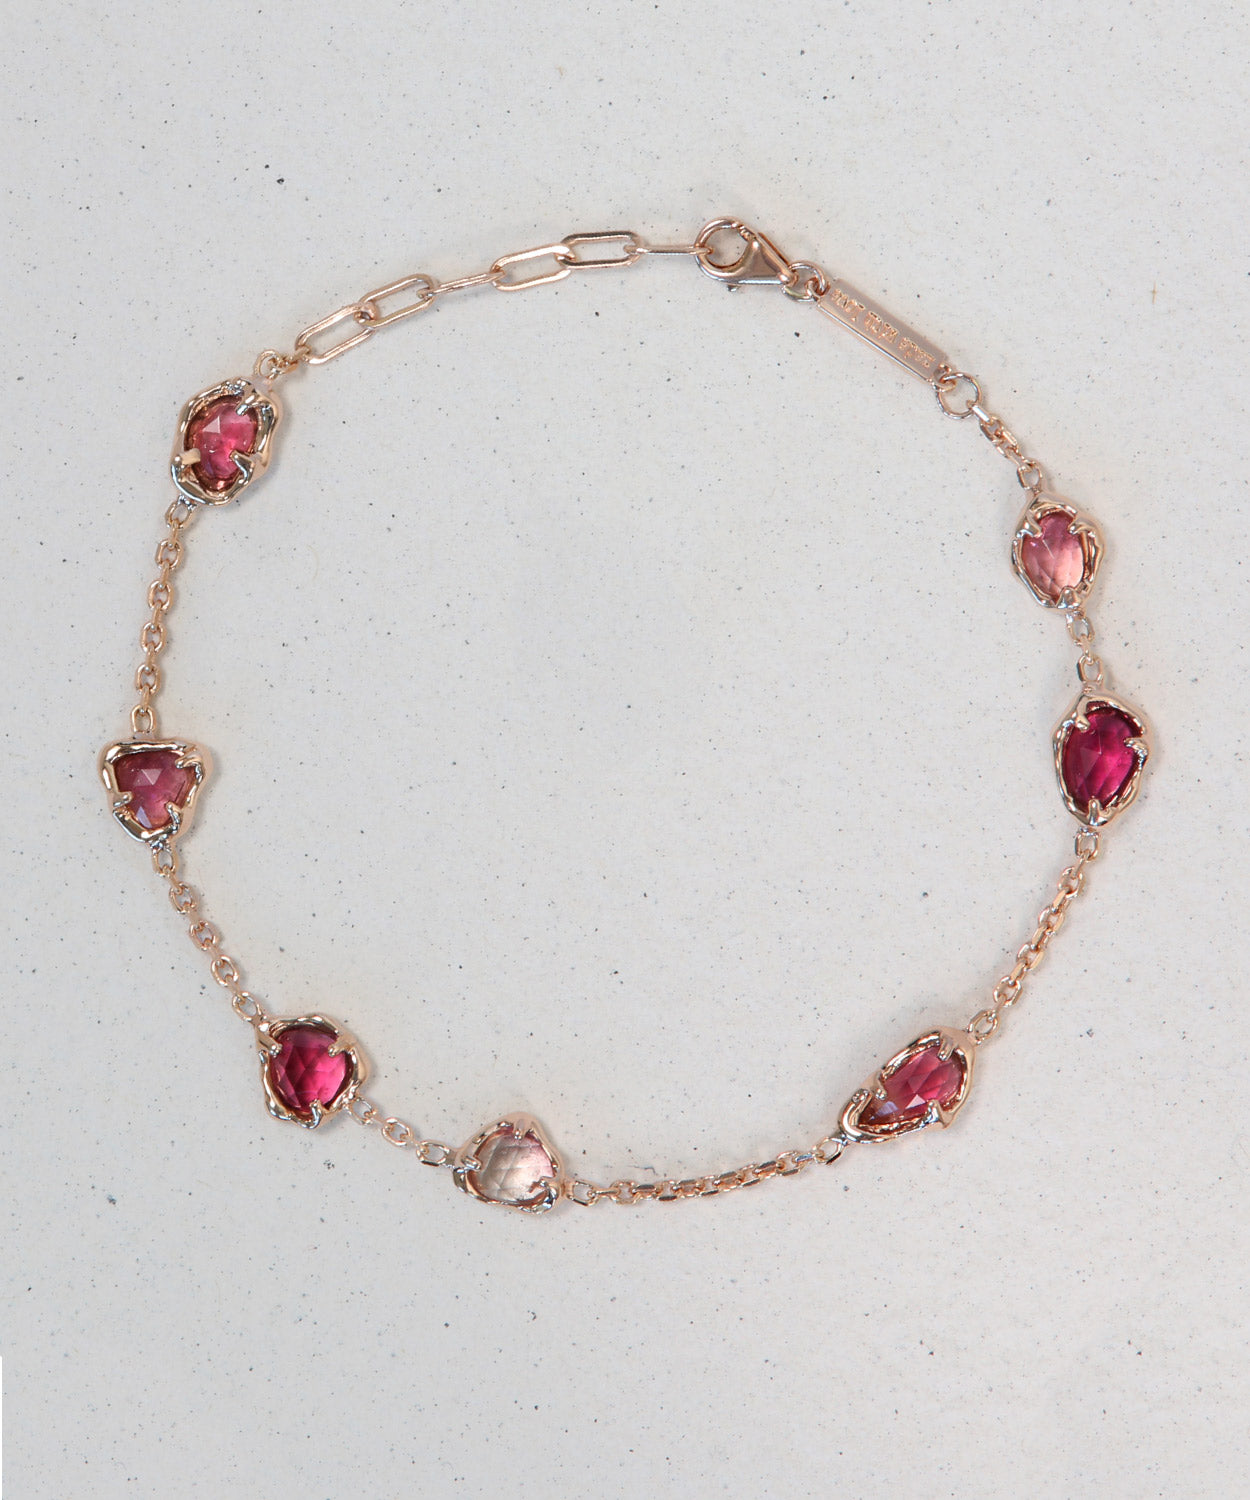 Goddess of All That Is Pink Bracelet